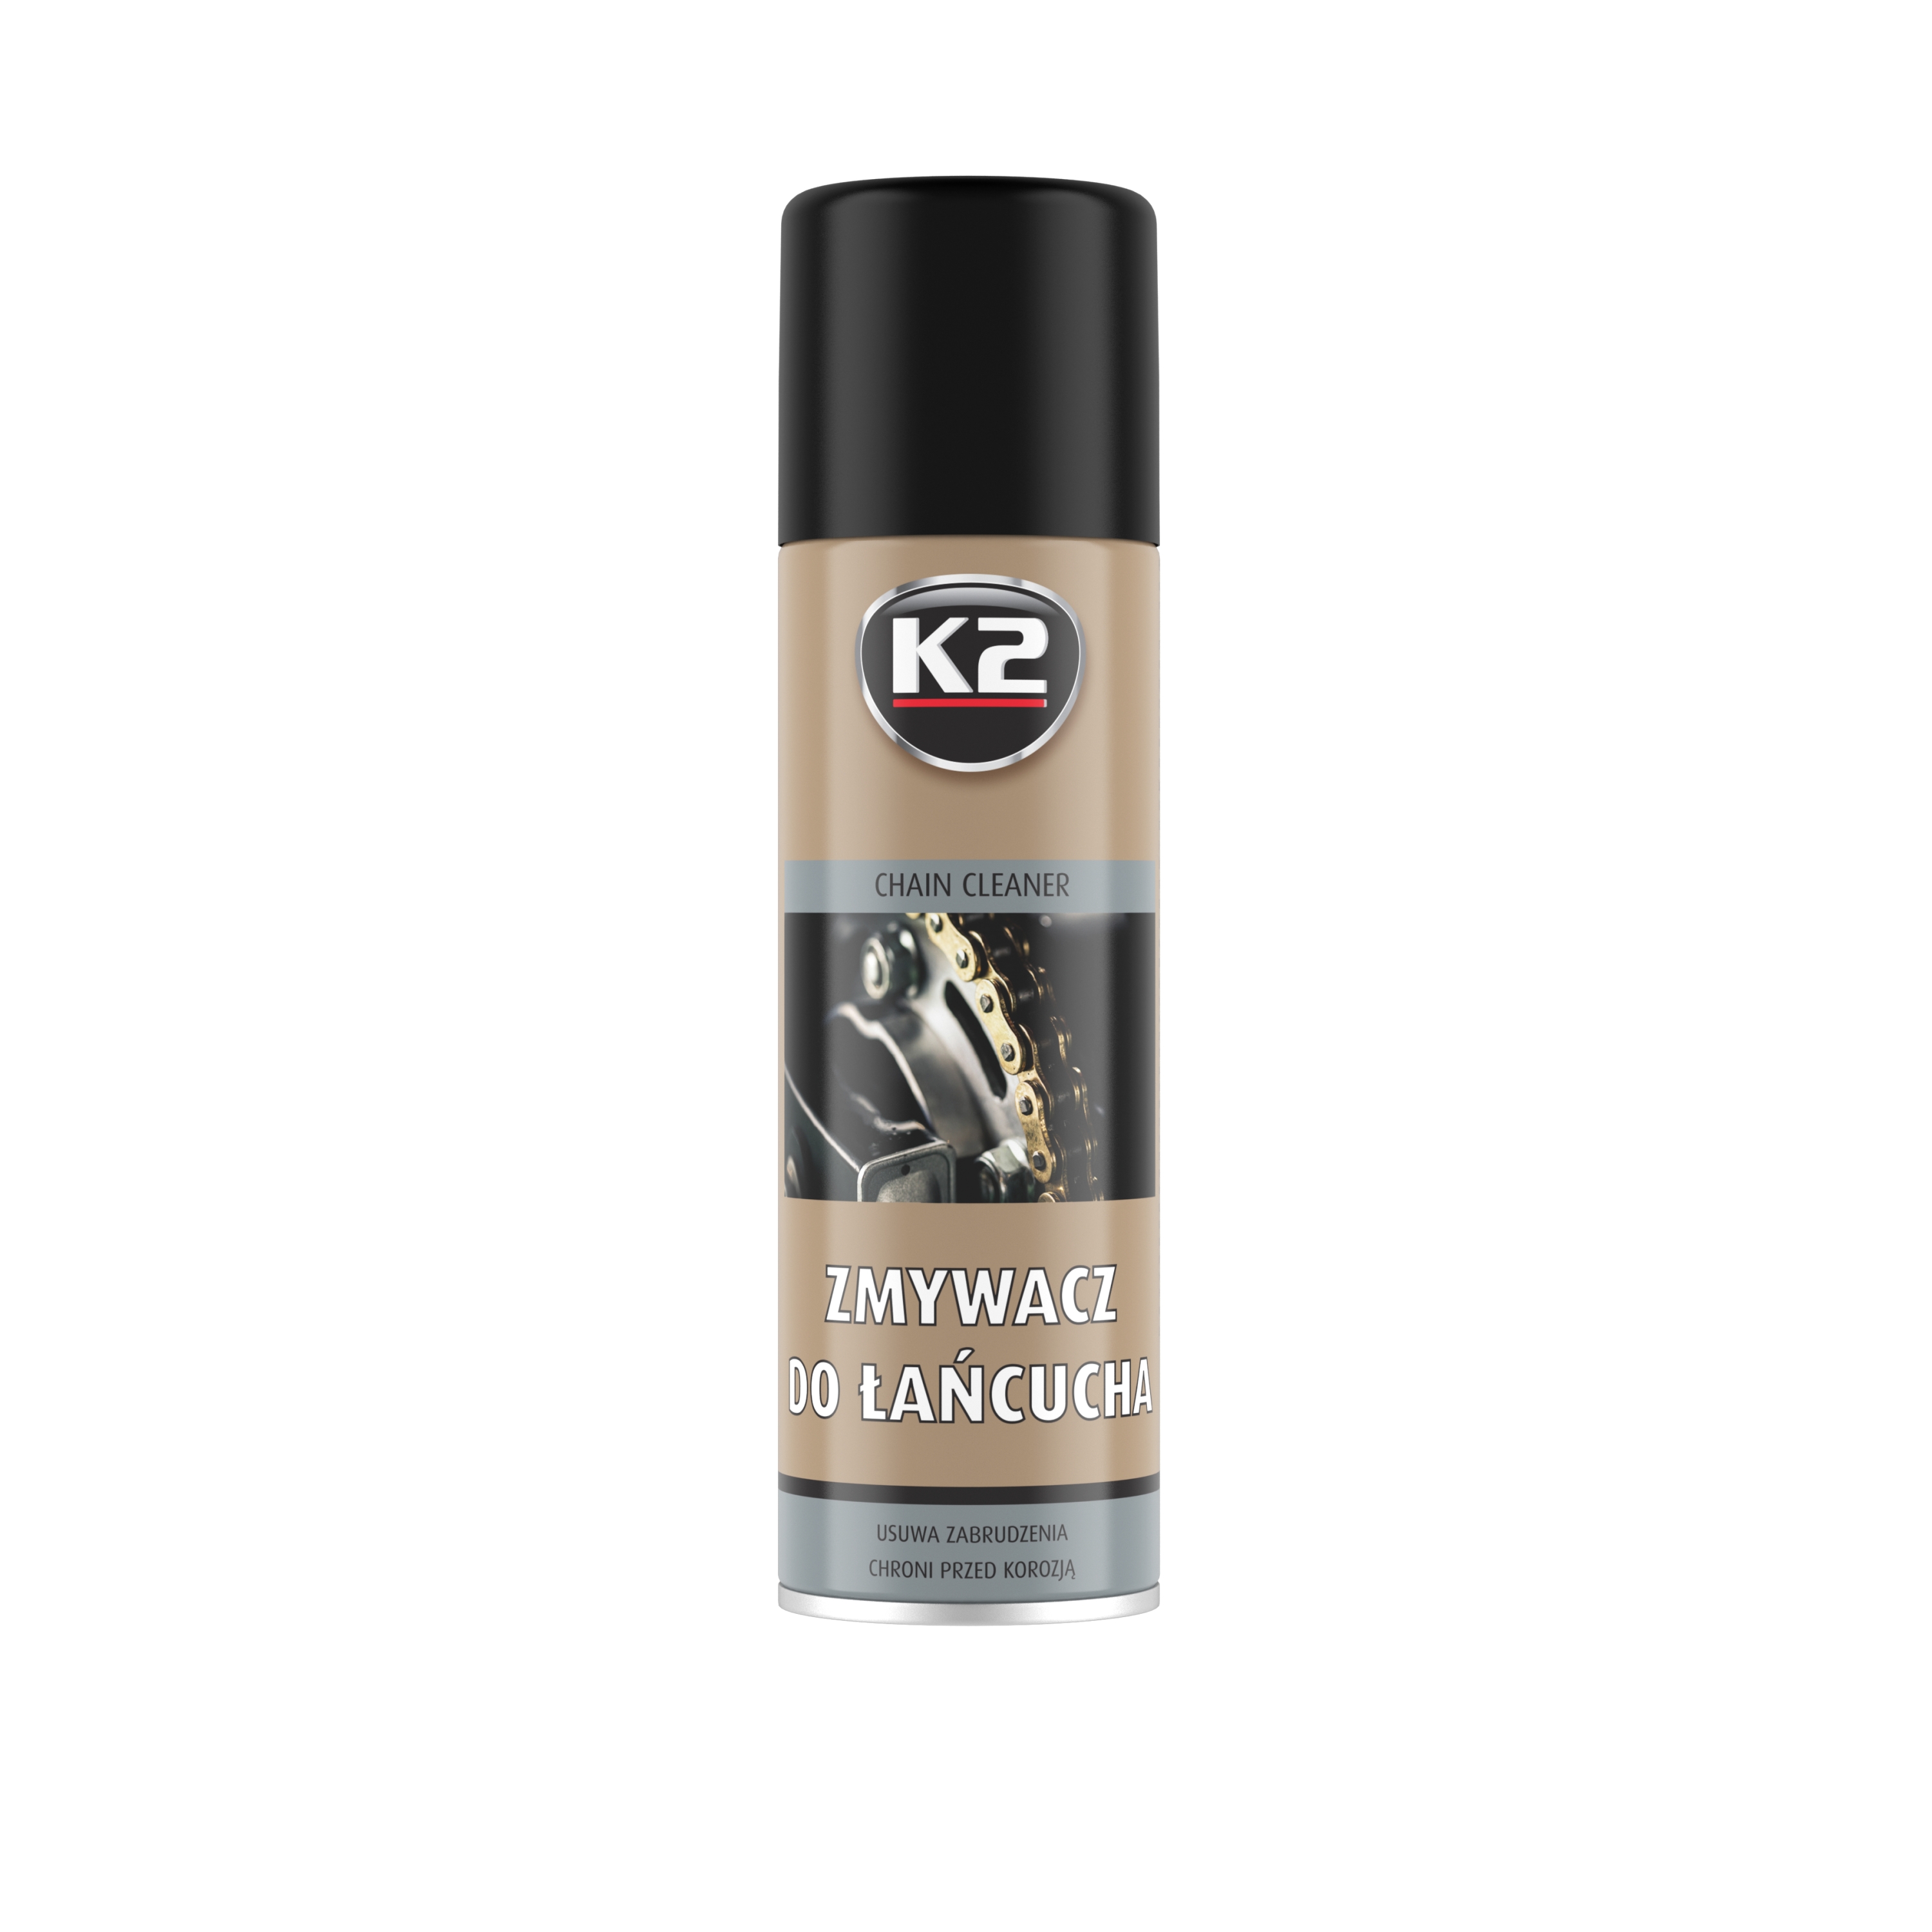 Lubricants, greases, silicones and other substances Belt Spray 500ml  Art. K2W148